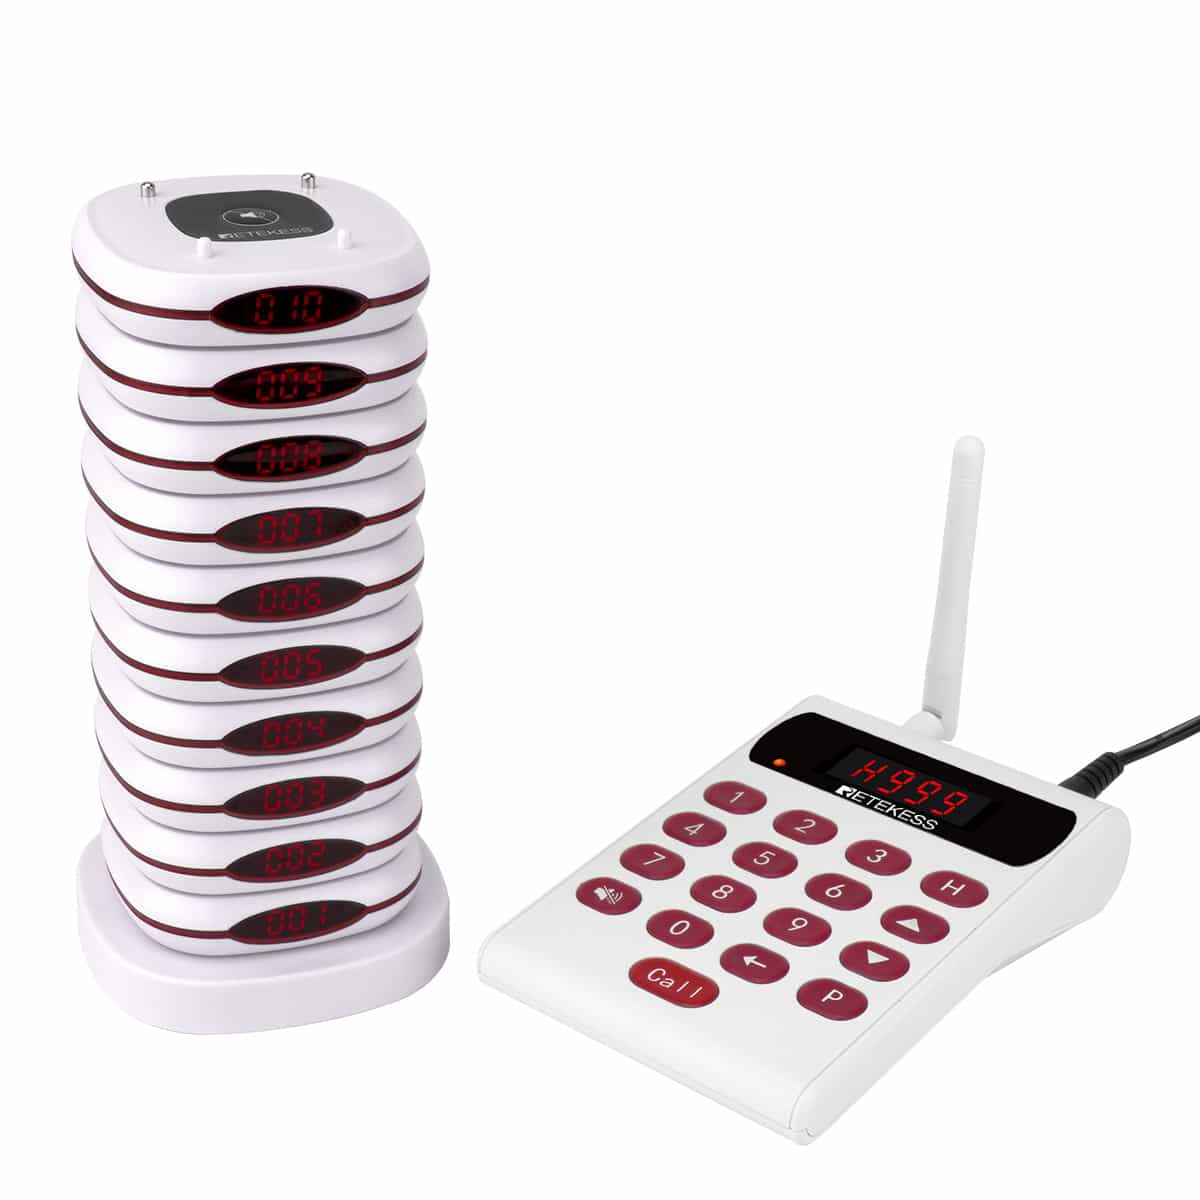 Retekess Restaurant Wireless Call Paging System Transmitter+16Chargerable Pagers 